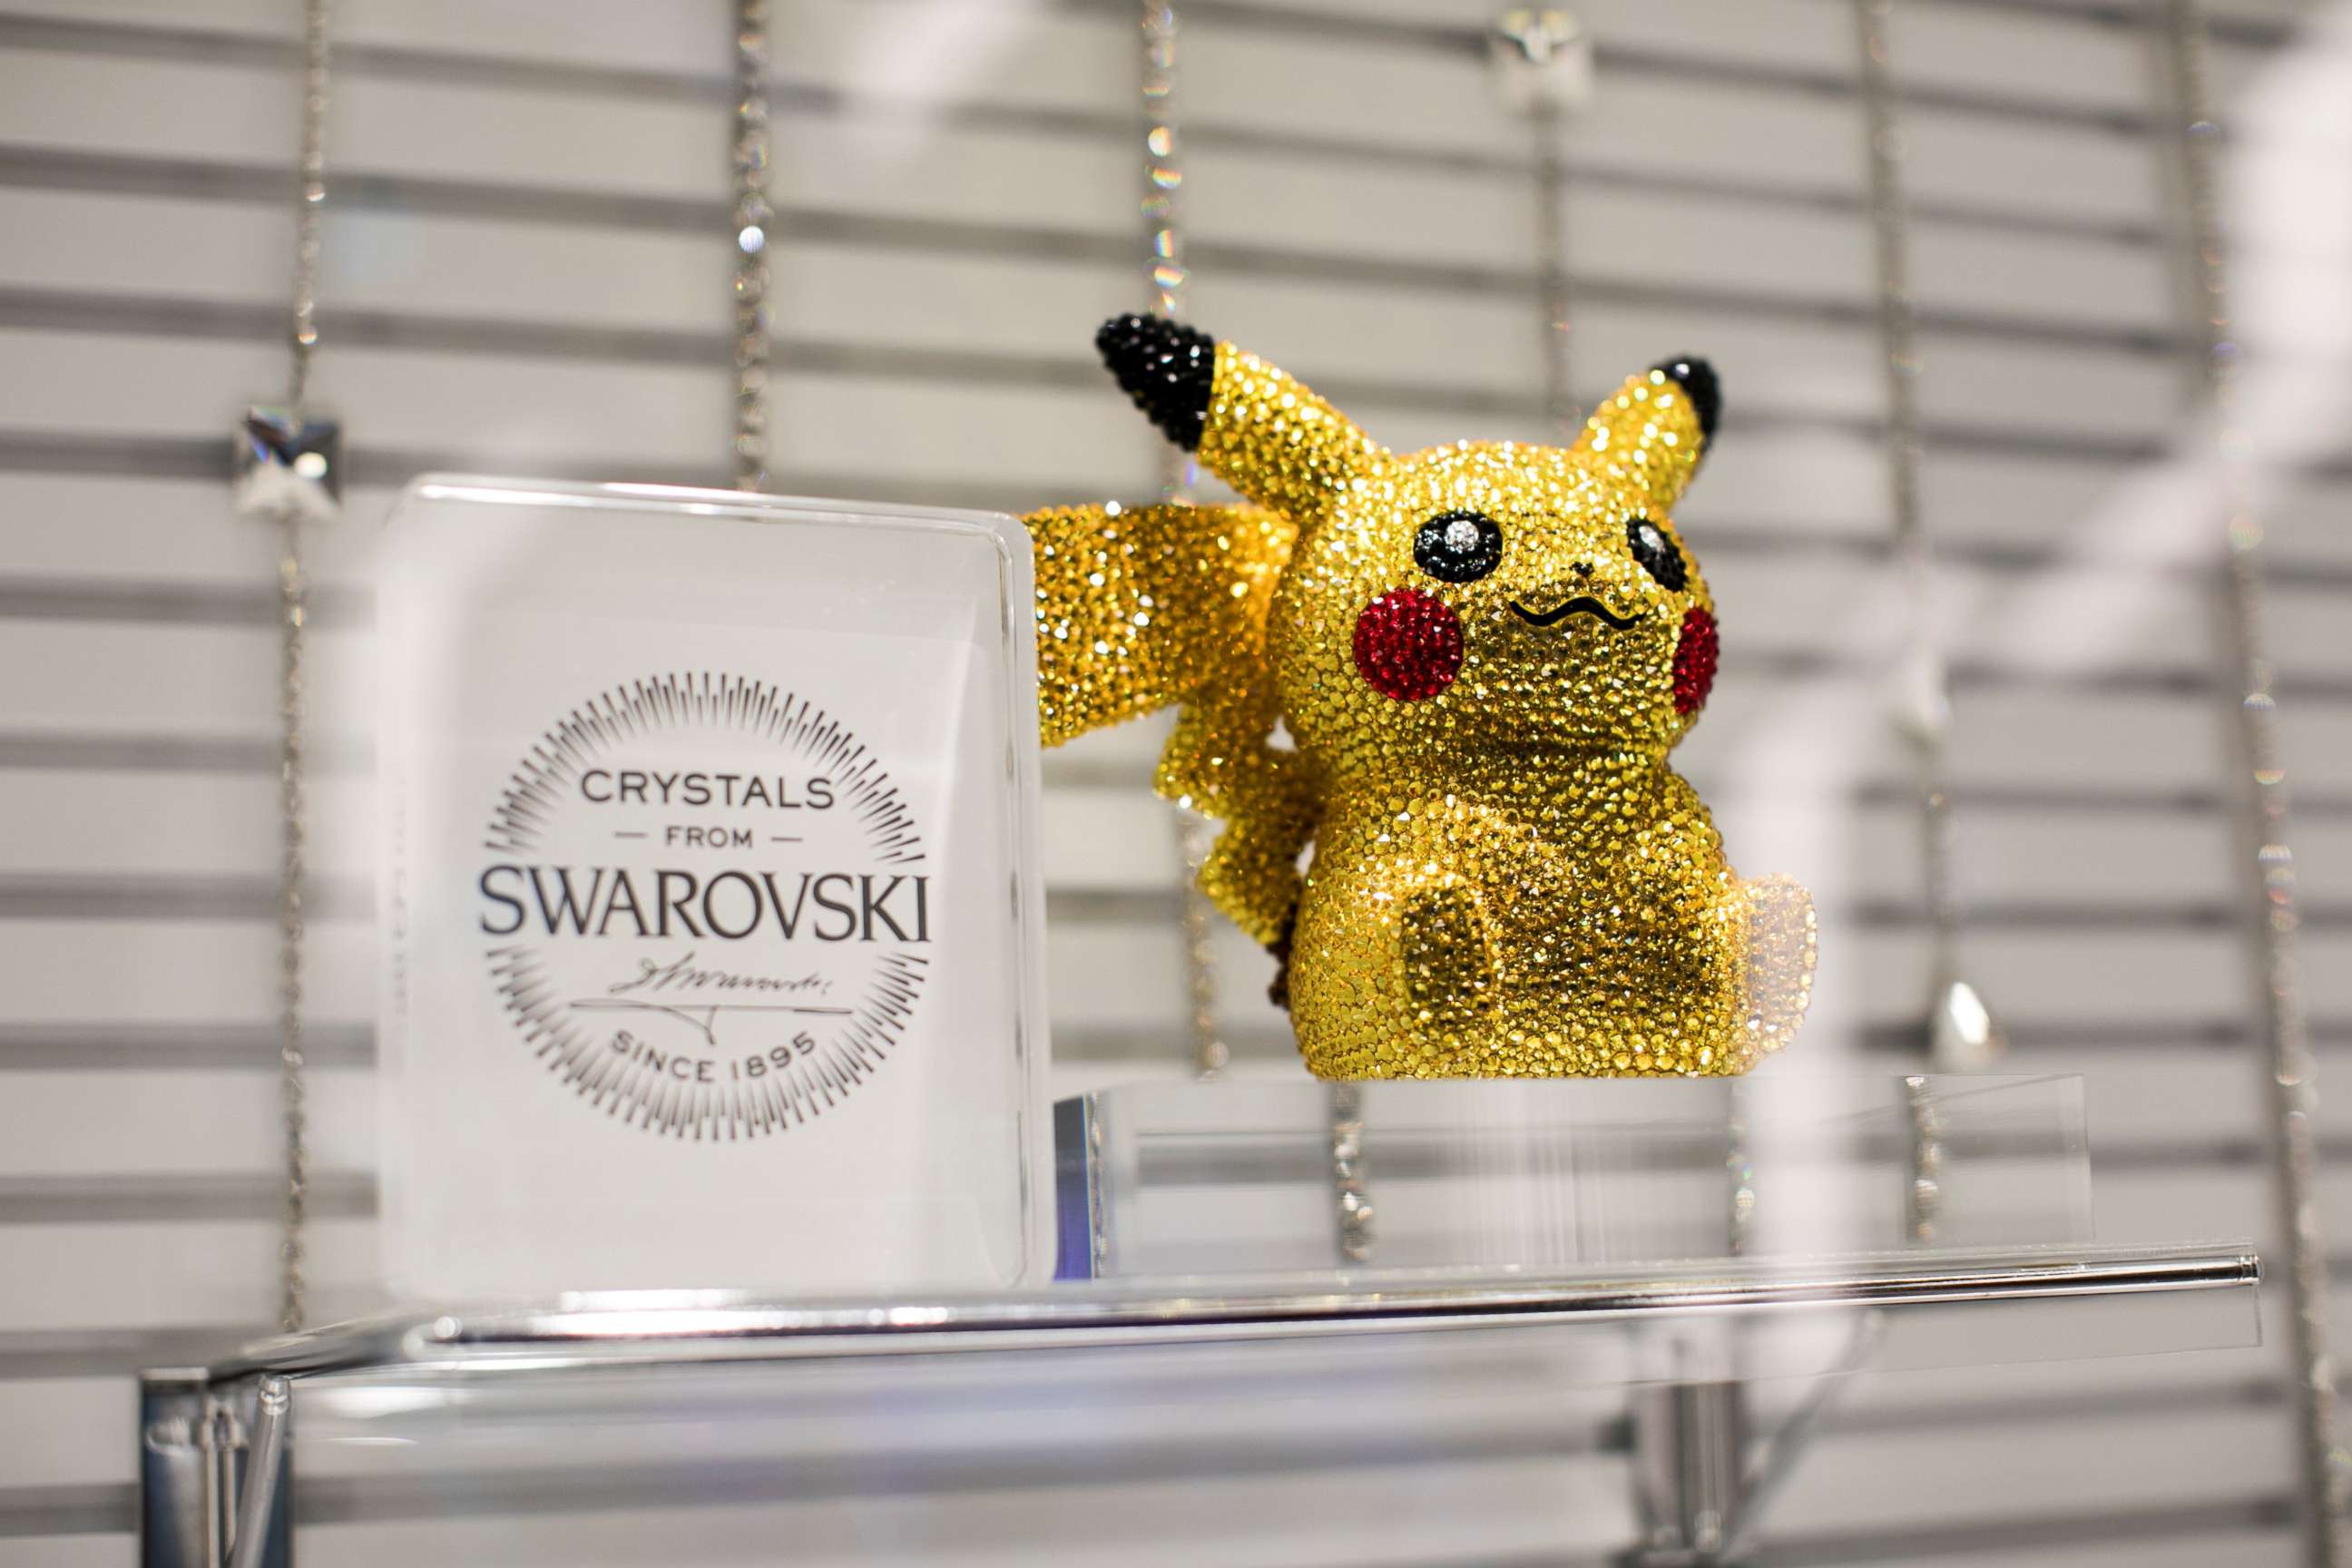 PHOTO: (FILES) In this file photo taken on November 19, 2019, a statuette of Pokemon game character Pikachu, studded with Swarovski crystals, is displayed at a Pokemon store during a press preview in Tokyo.